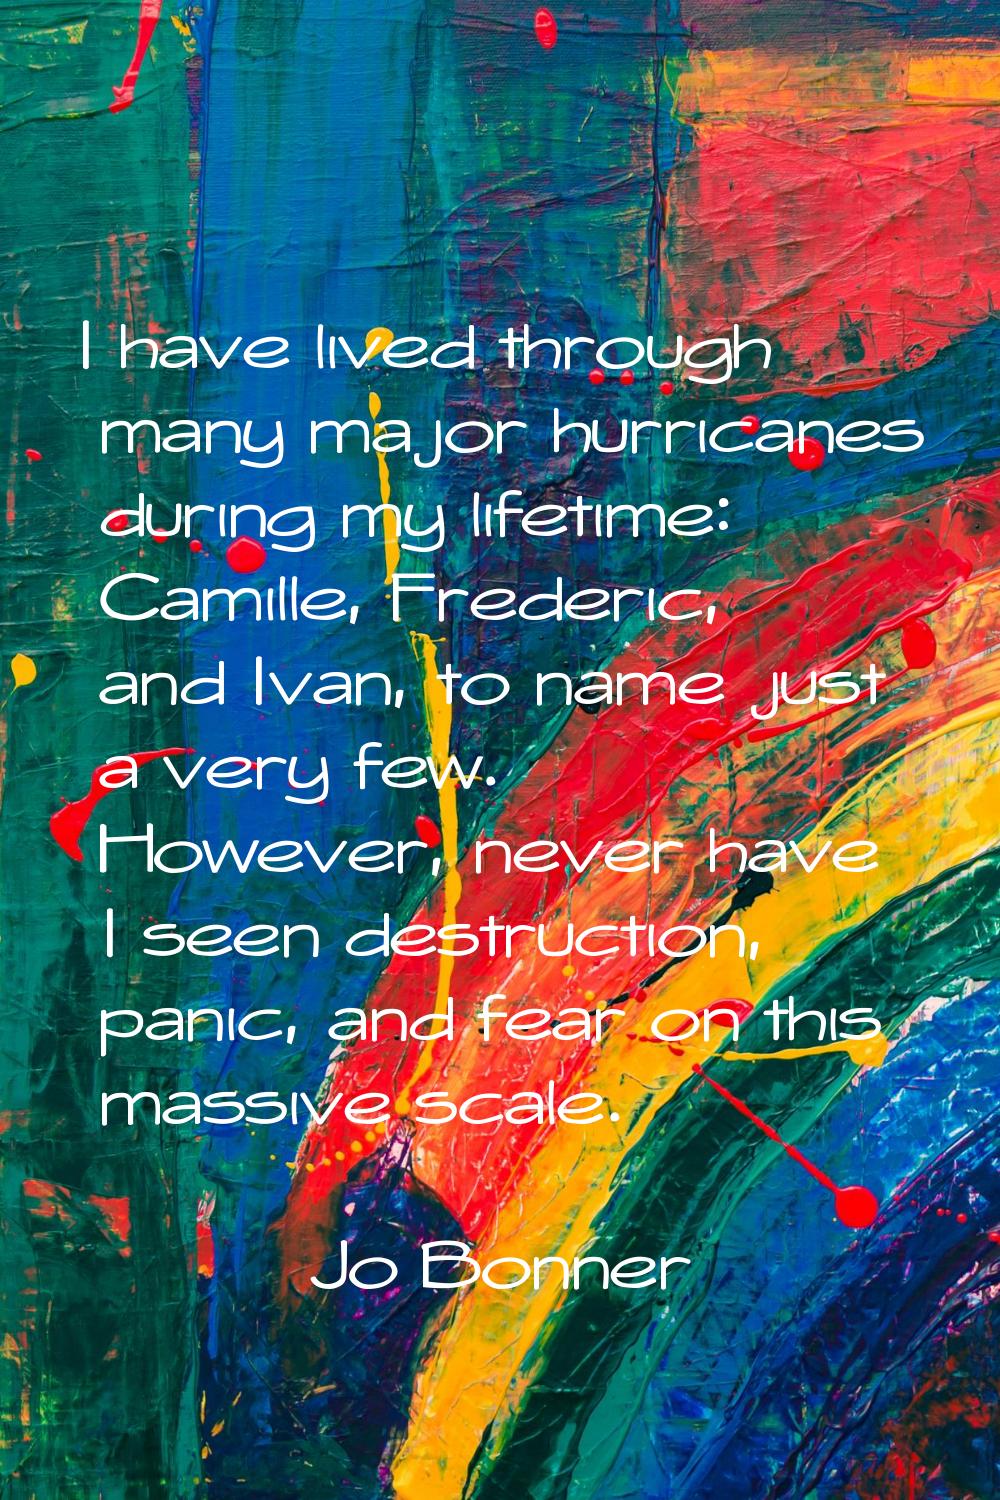 I have lived through many major hurricanes during my lifetime: Camille, Frederic, and Ivan, to name